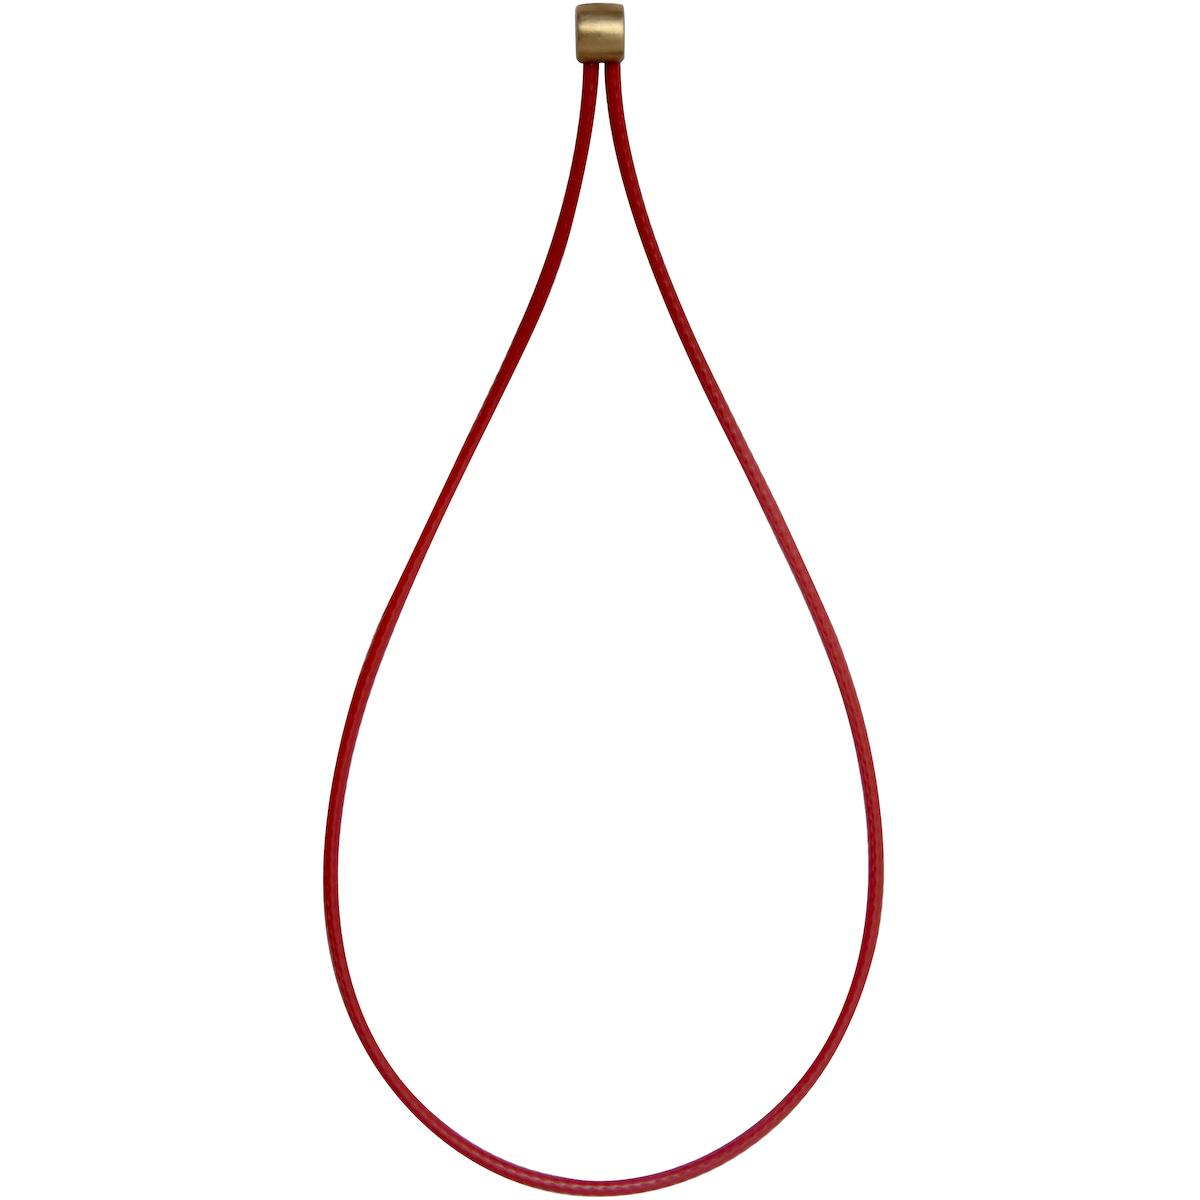 Wire Sling Loop - 2 lbs. maximum load limit - Retail Packaged, Red (533-100801) - OS_1